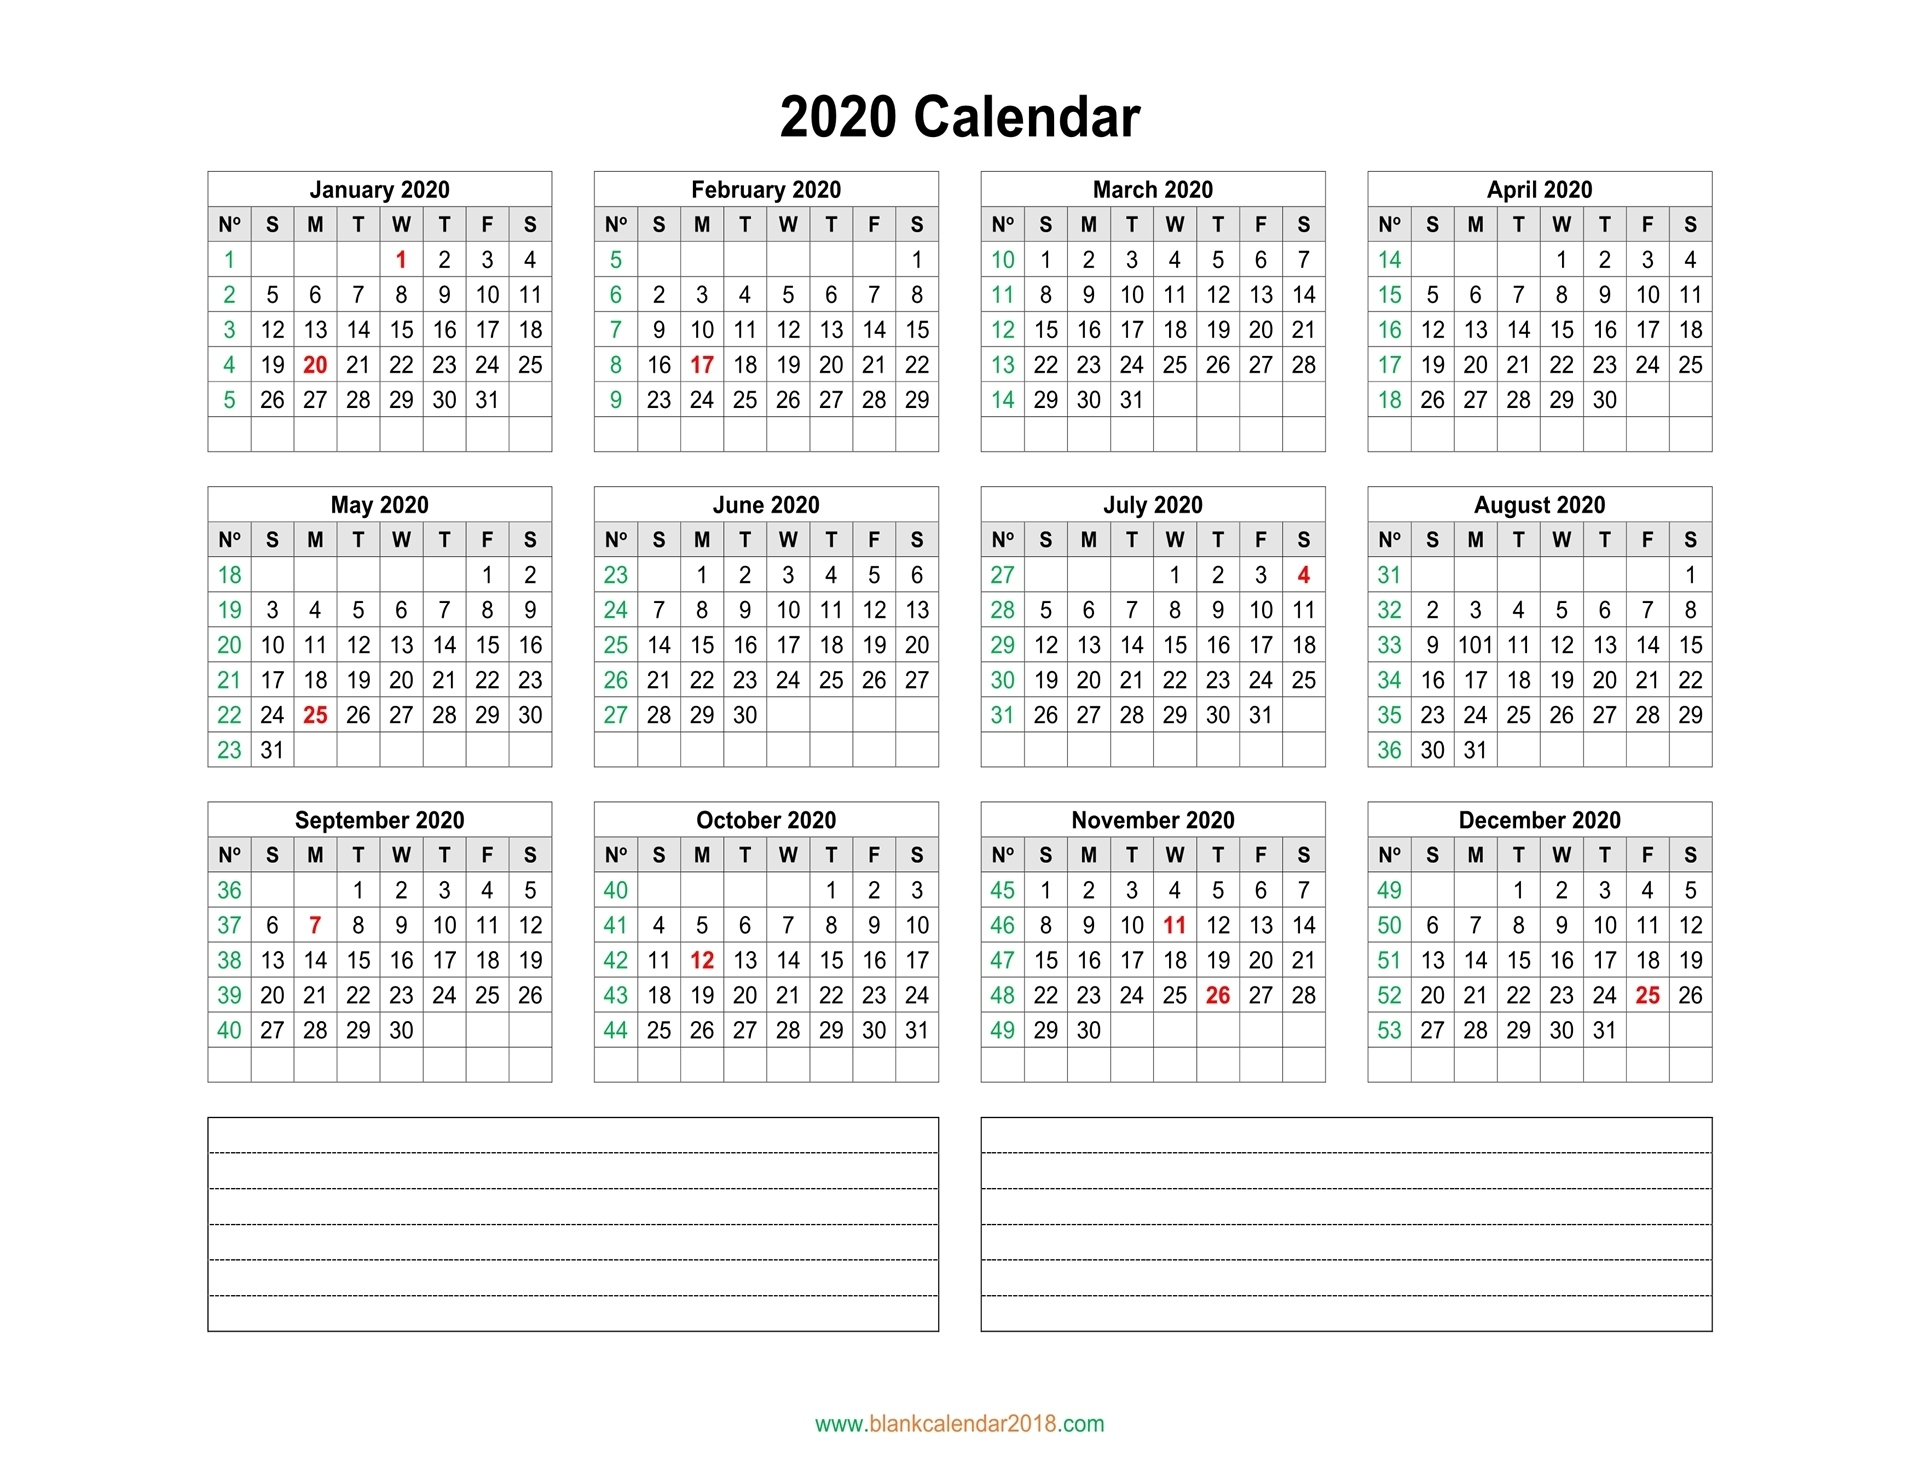 Blank Calendar 2020 Dashing 2020 Calender With Numbered Days